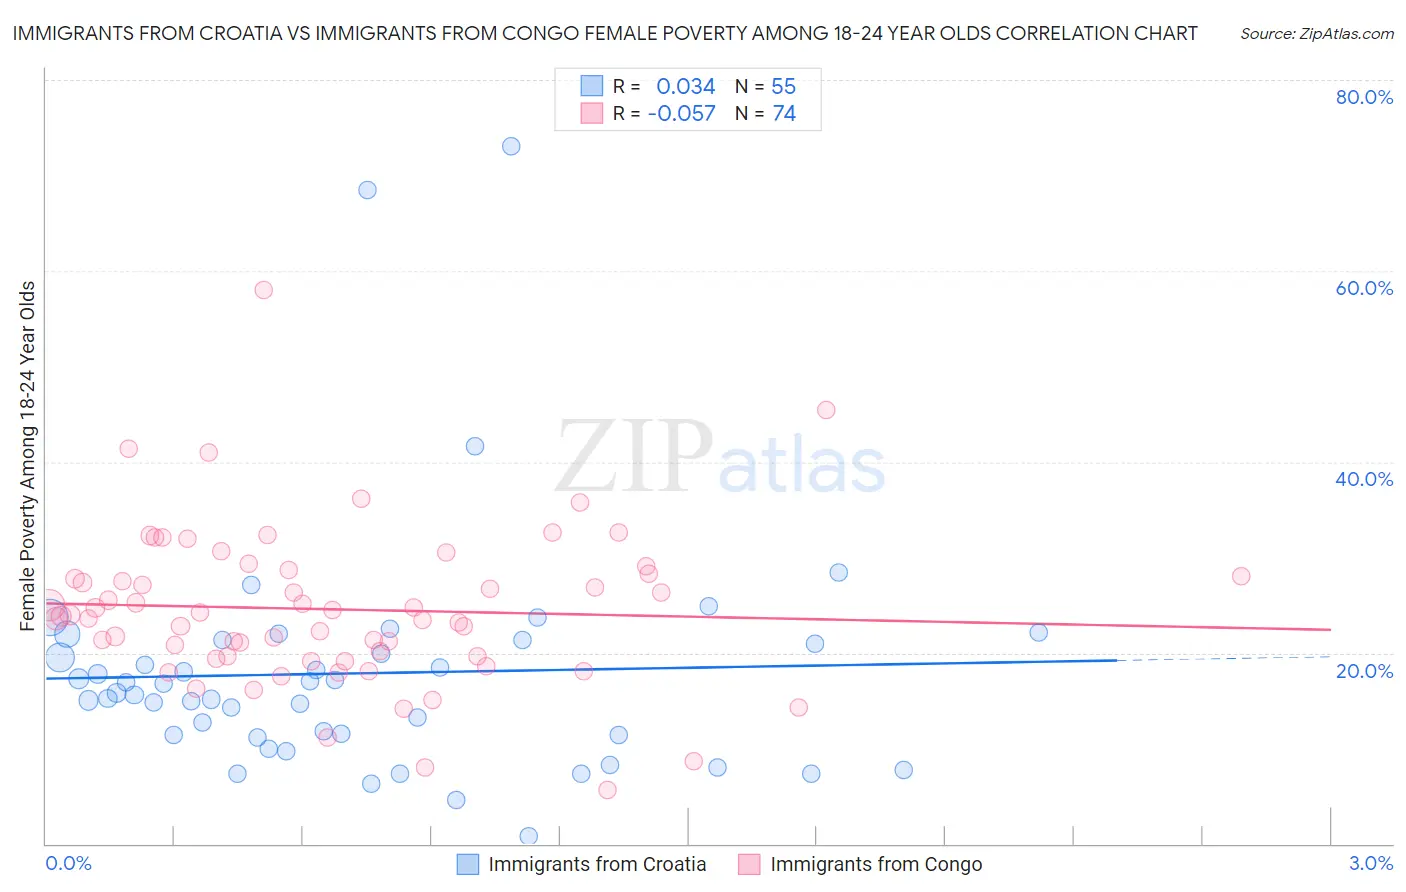 Immigrants from Croatia vs Immigrants from Congo Female Poverty Among 18-24 Year Olds